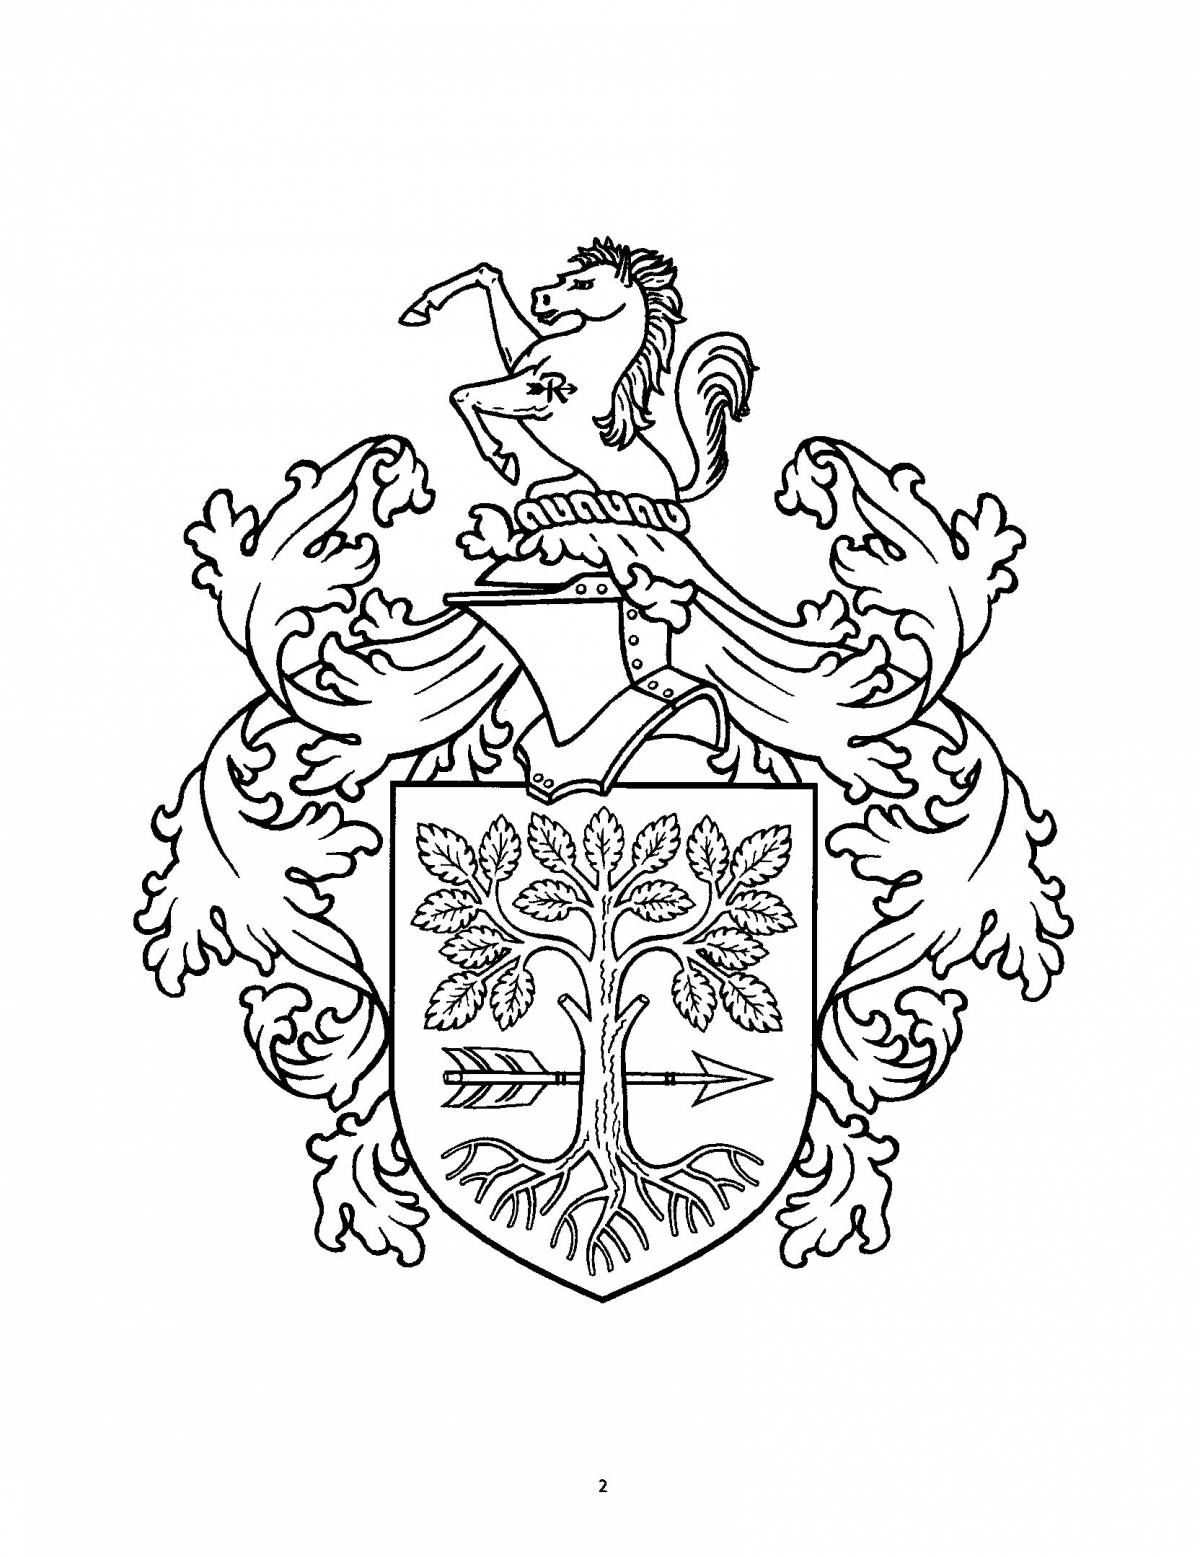 Family coat of arms #1